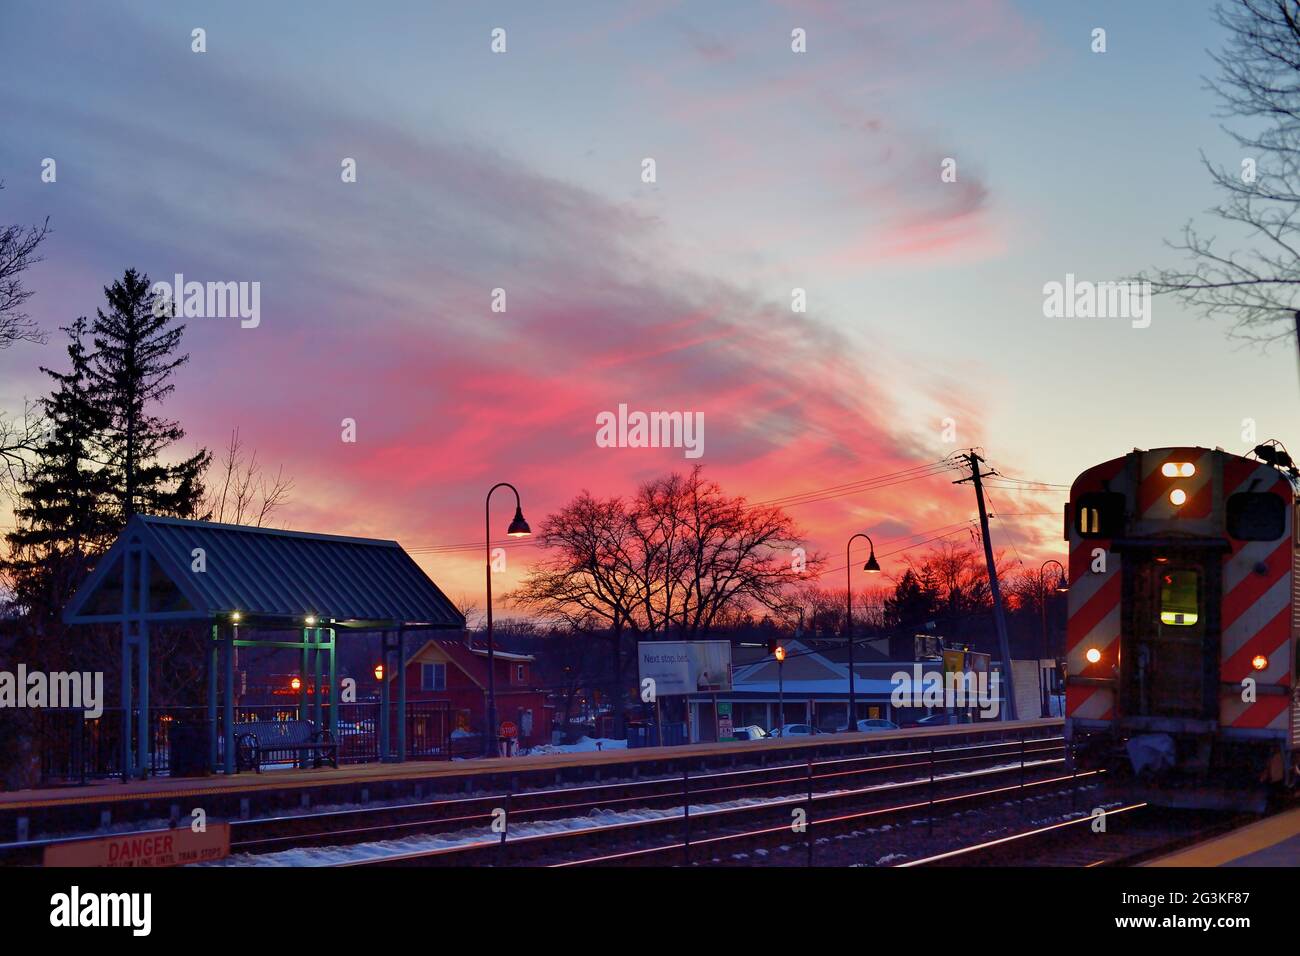 Winfield, Illinois, USA. The setting sun fills high clouds with color as a Metra communter train departs the railroad station on its continuing journe Stock Photo